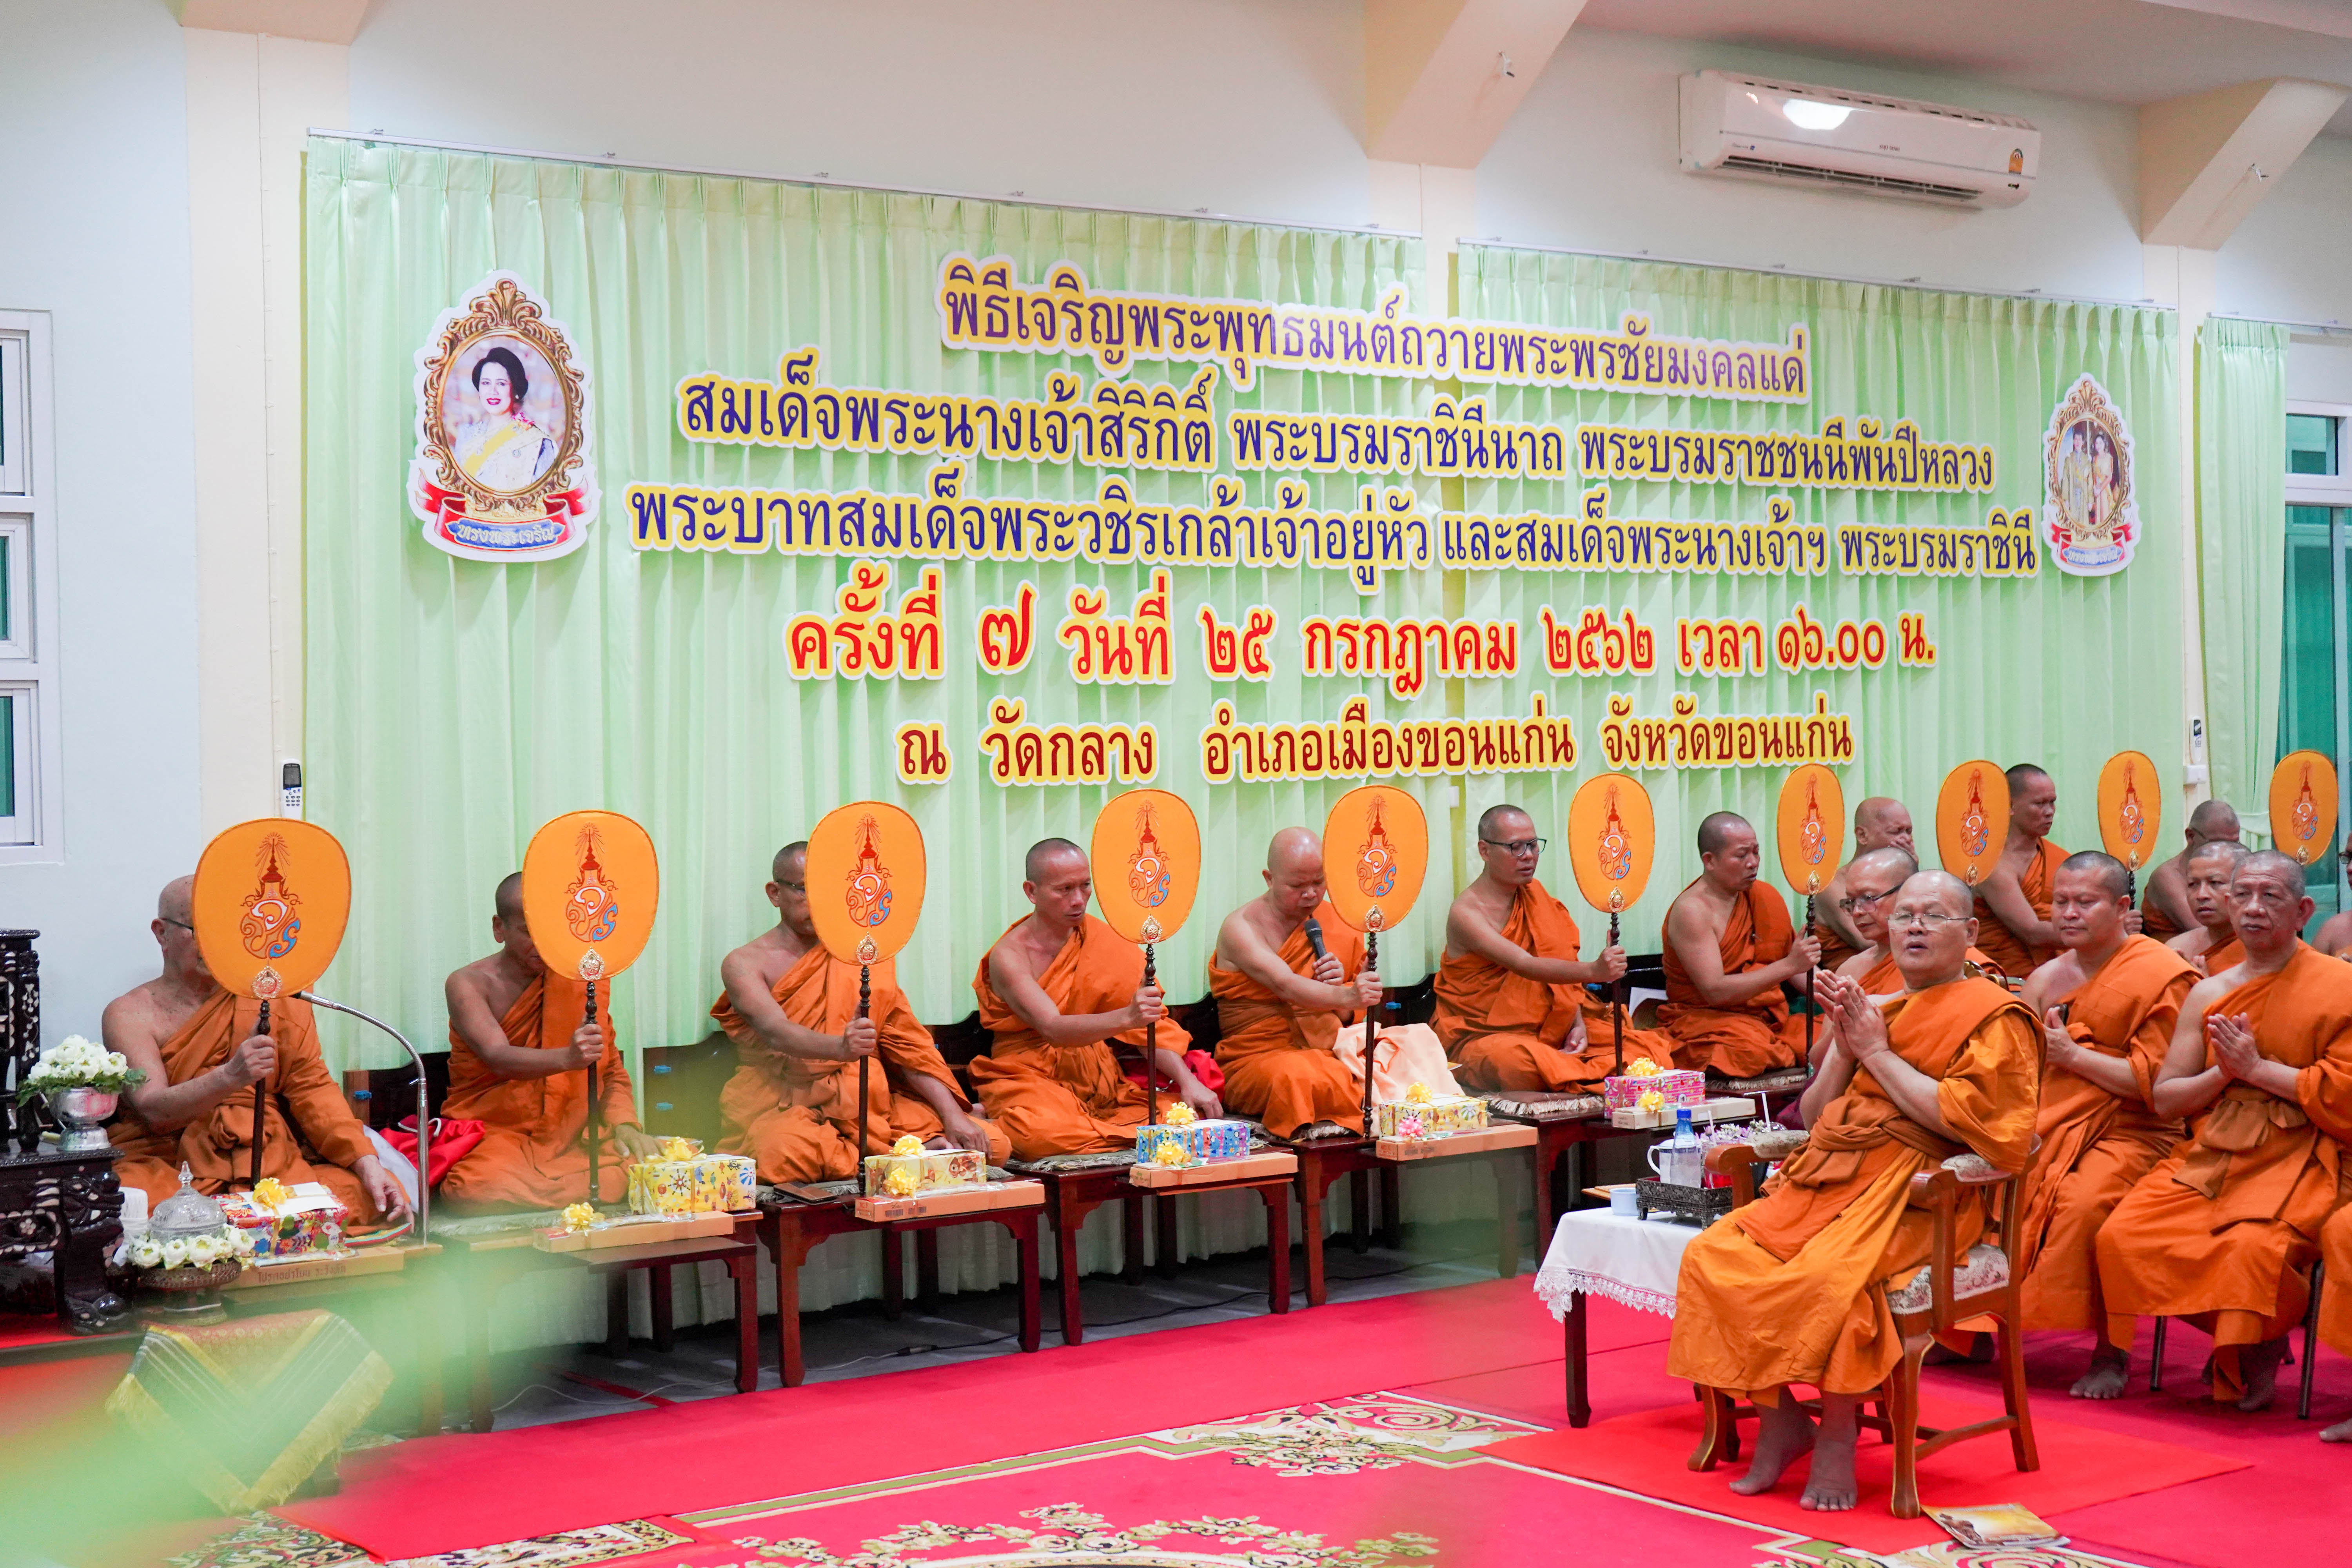 KKU attends the 7th religious chanting ceremony for blessing HM the King